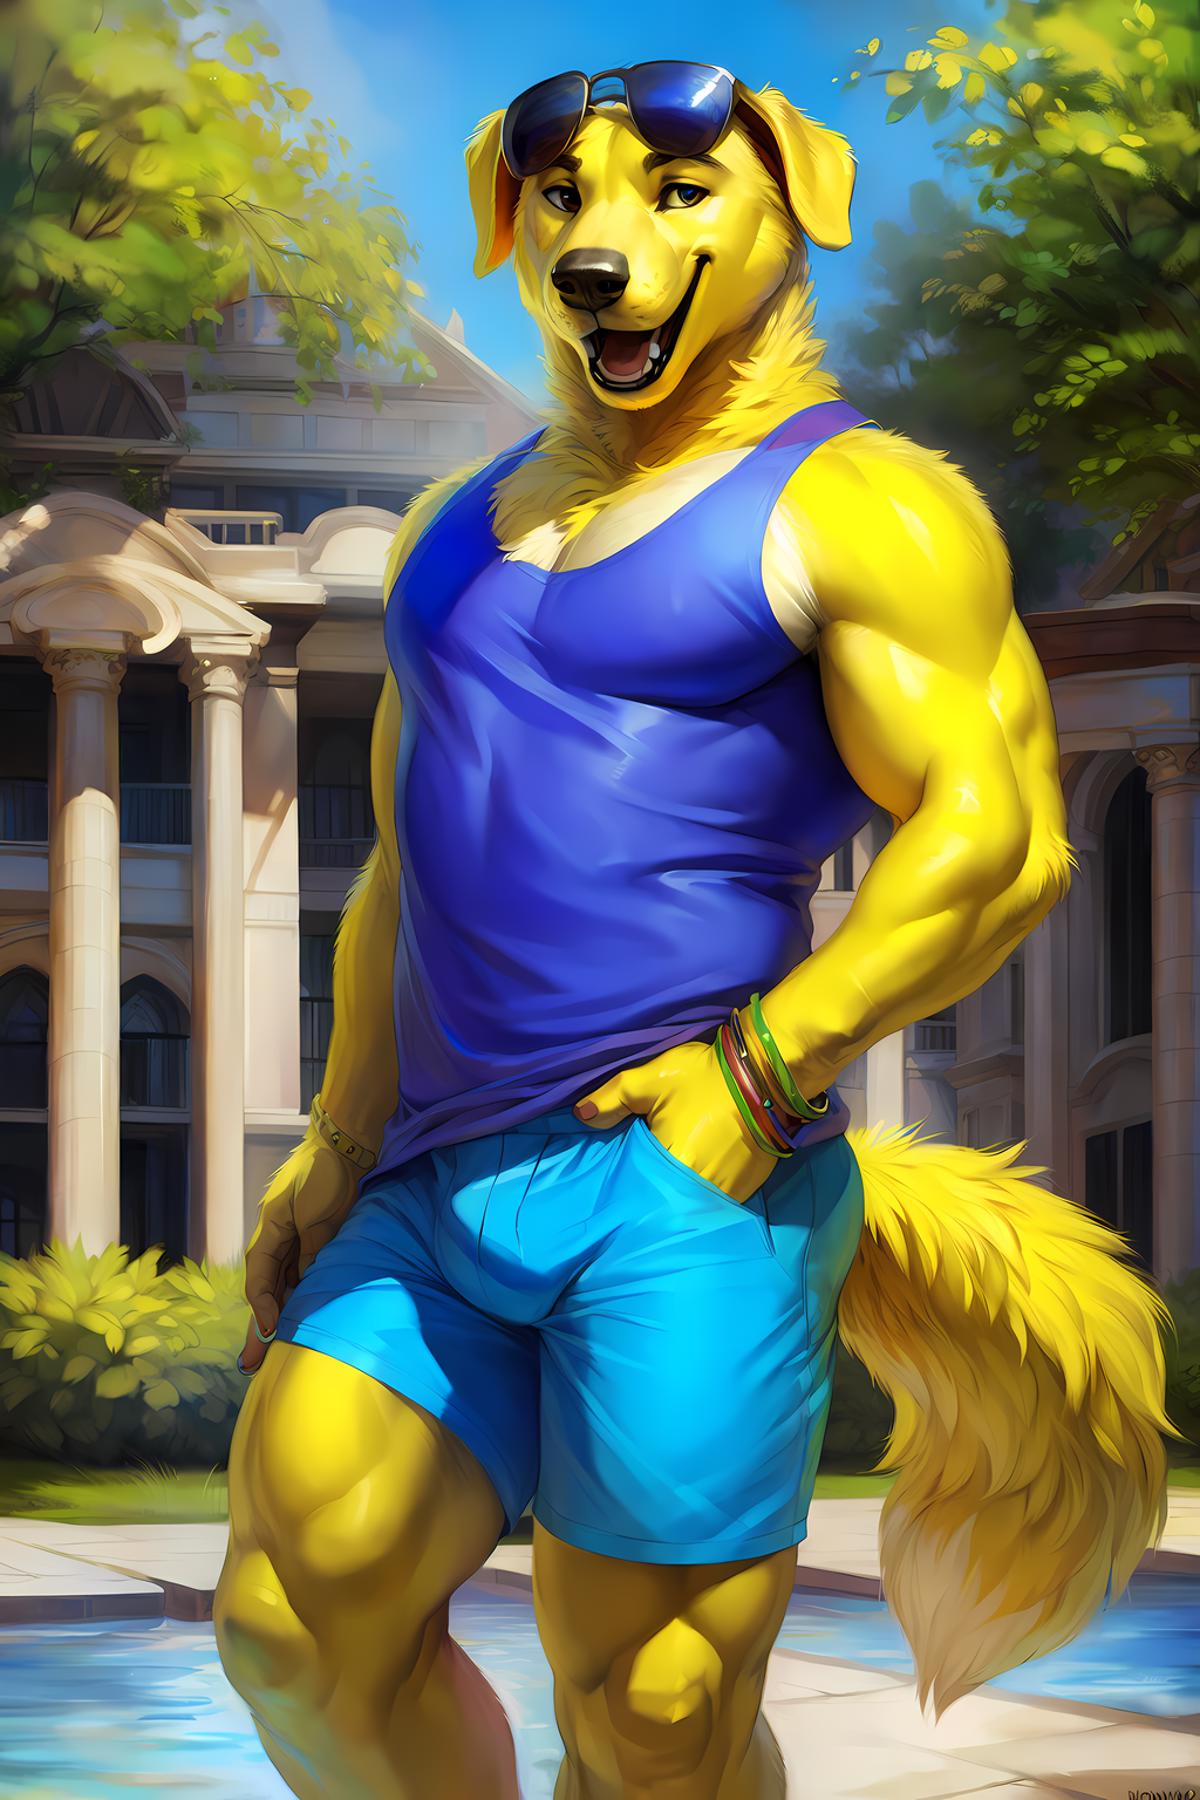 Mr Peanutbutter image by BeerYeen